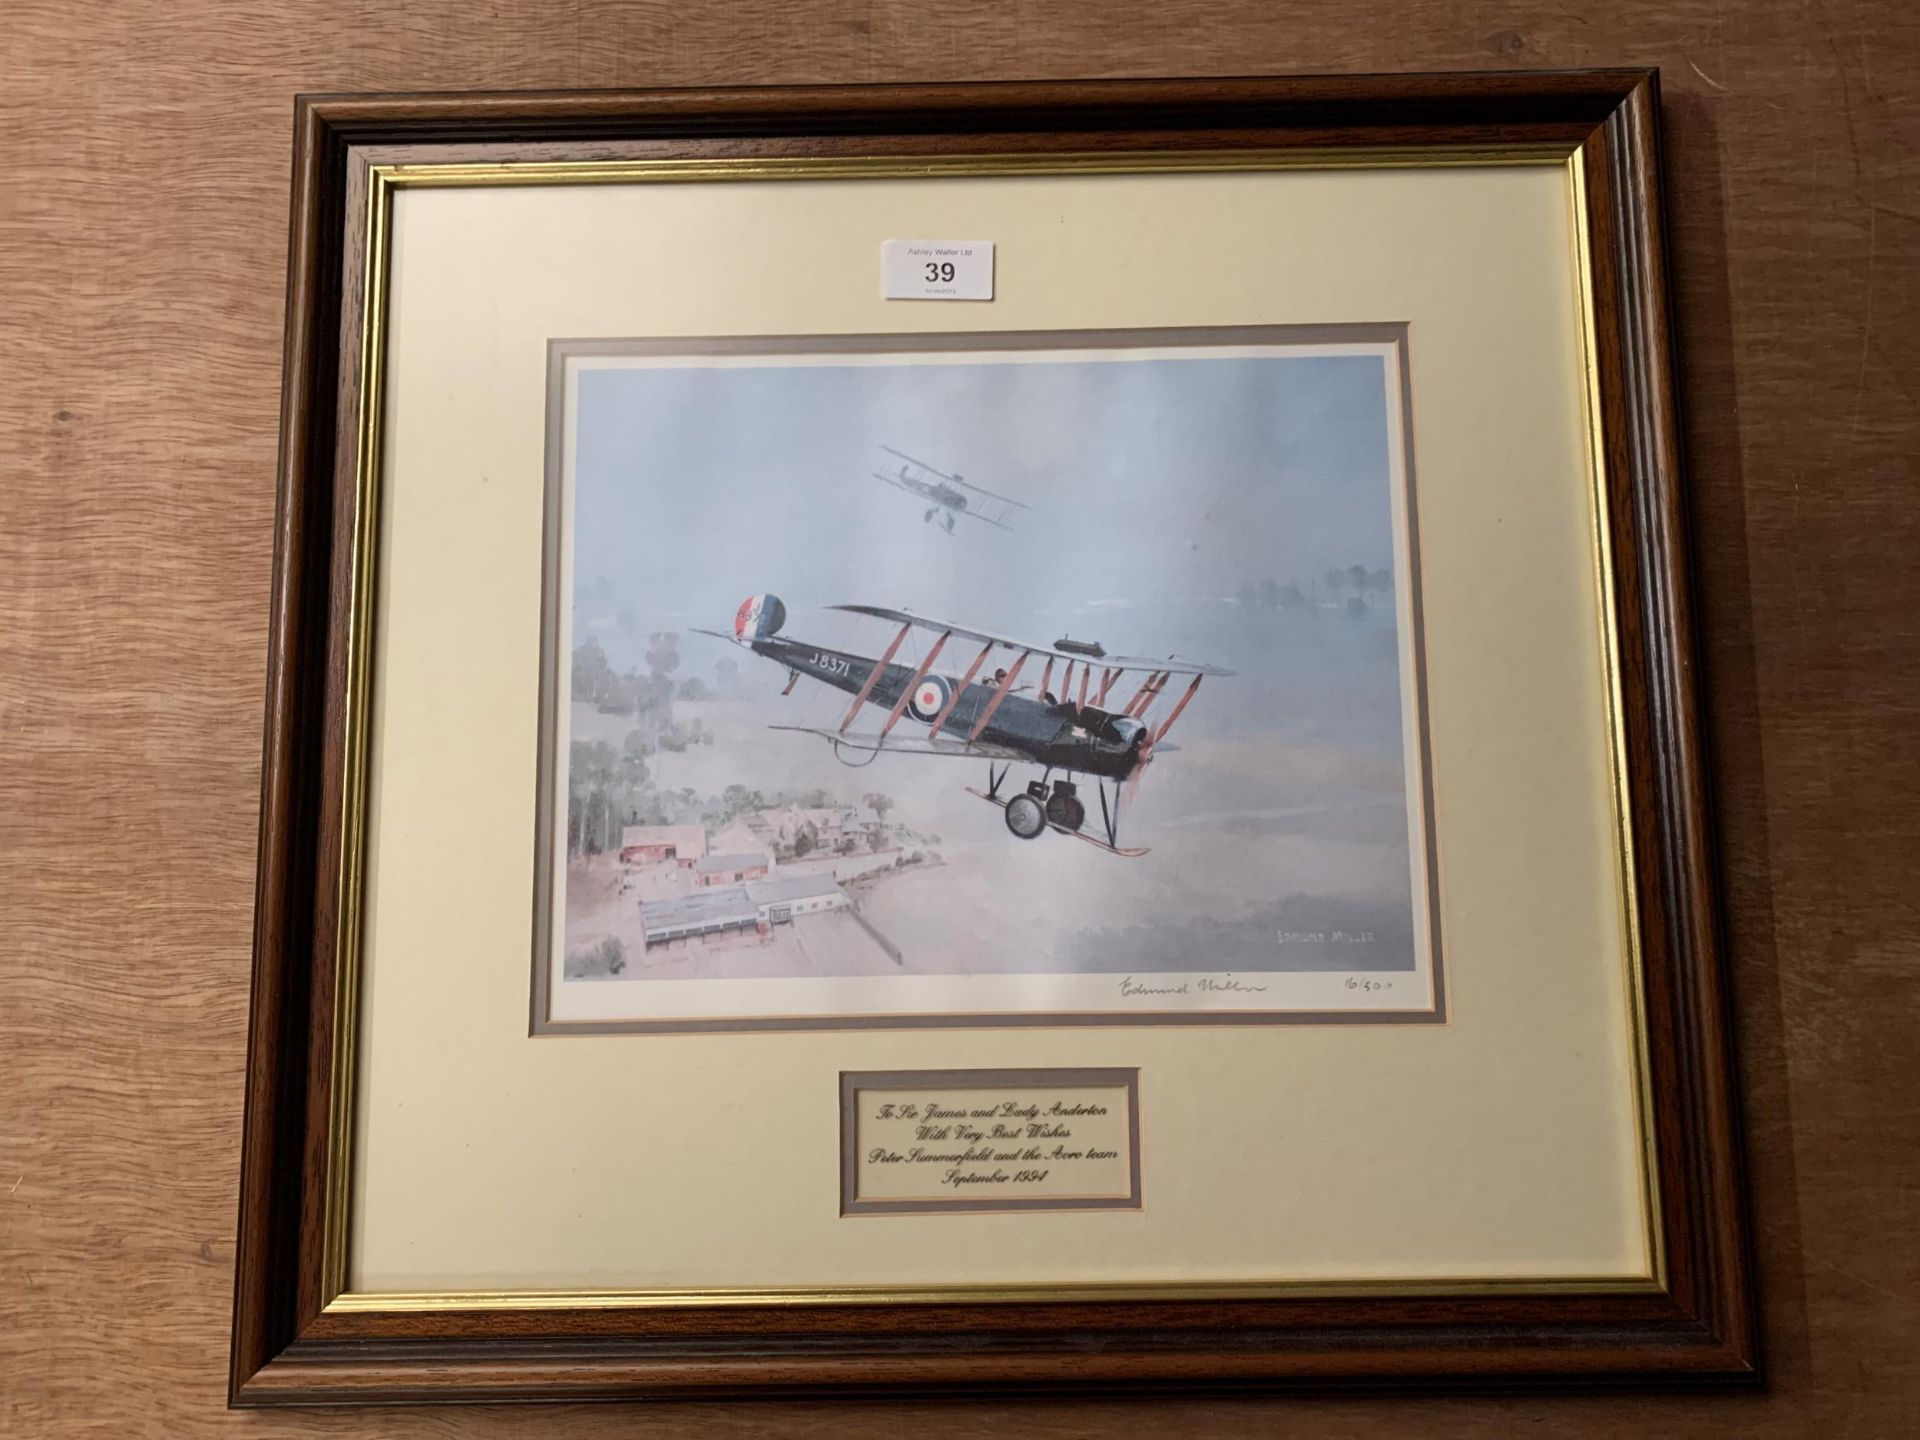 * EDMUND MILLER (BRITISH, 1929) AVRO 540 BIPLANES IN FLIGHT, LIMITED EDITION 16/50, SIGNED BY THE